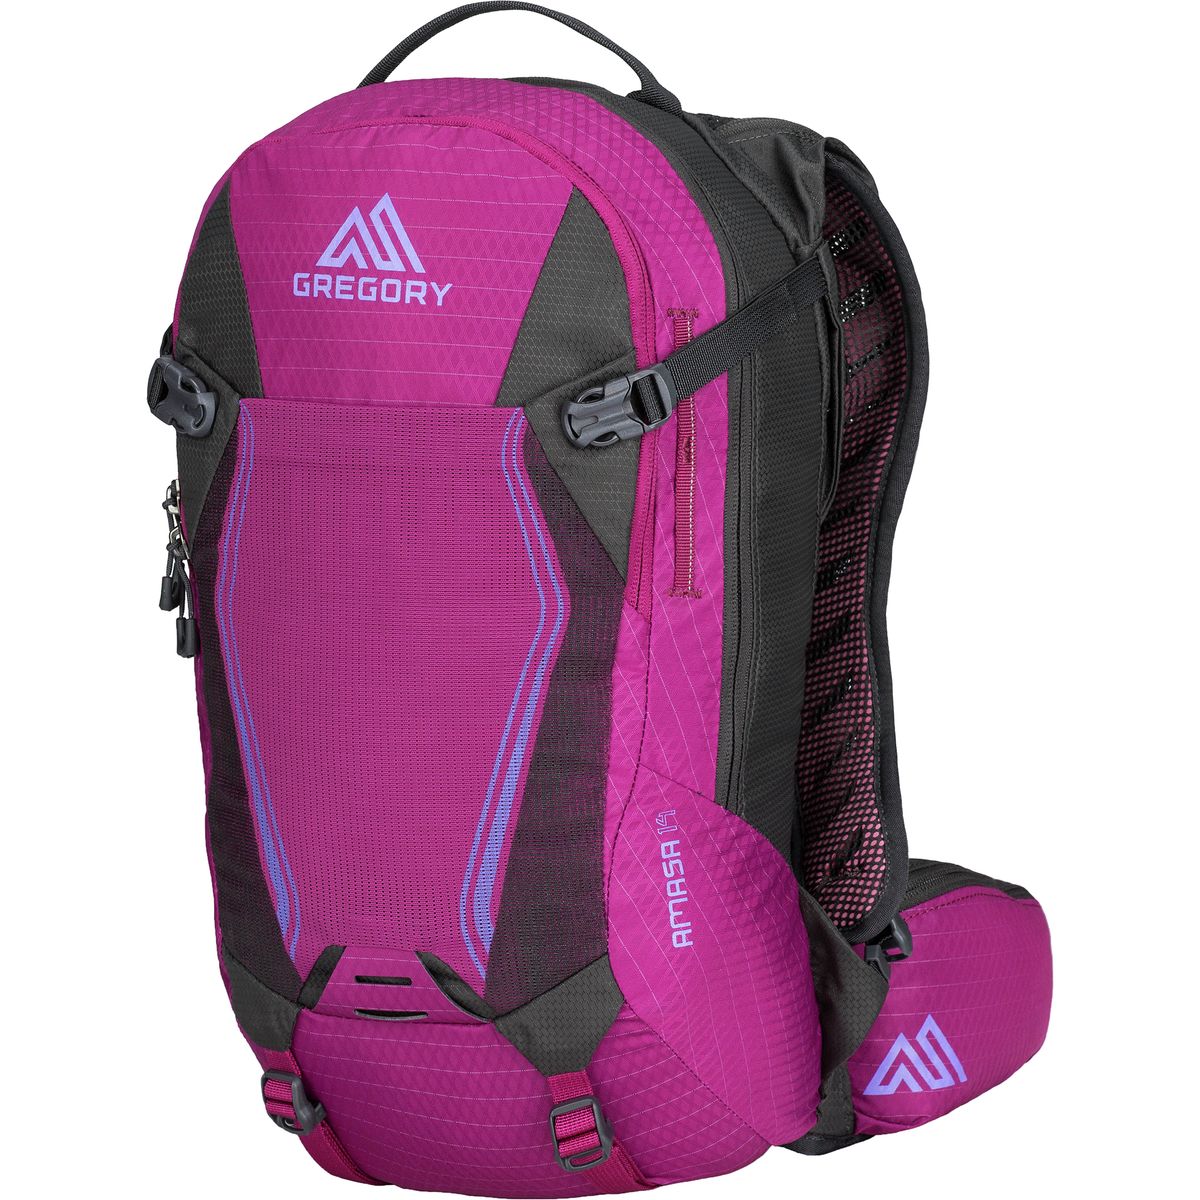 Gregory Amasa 14 Hydration Backpack Womens 854cu in